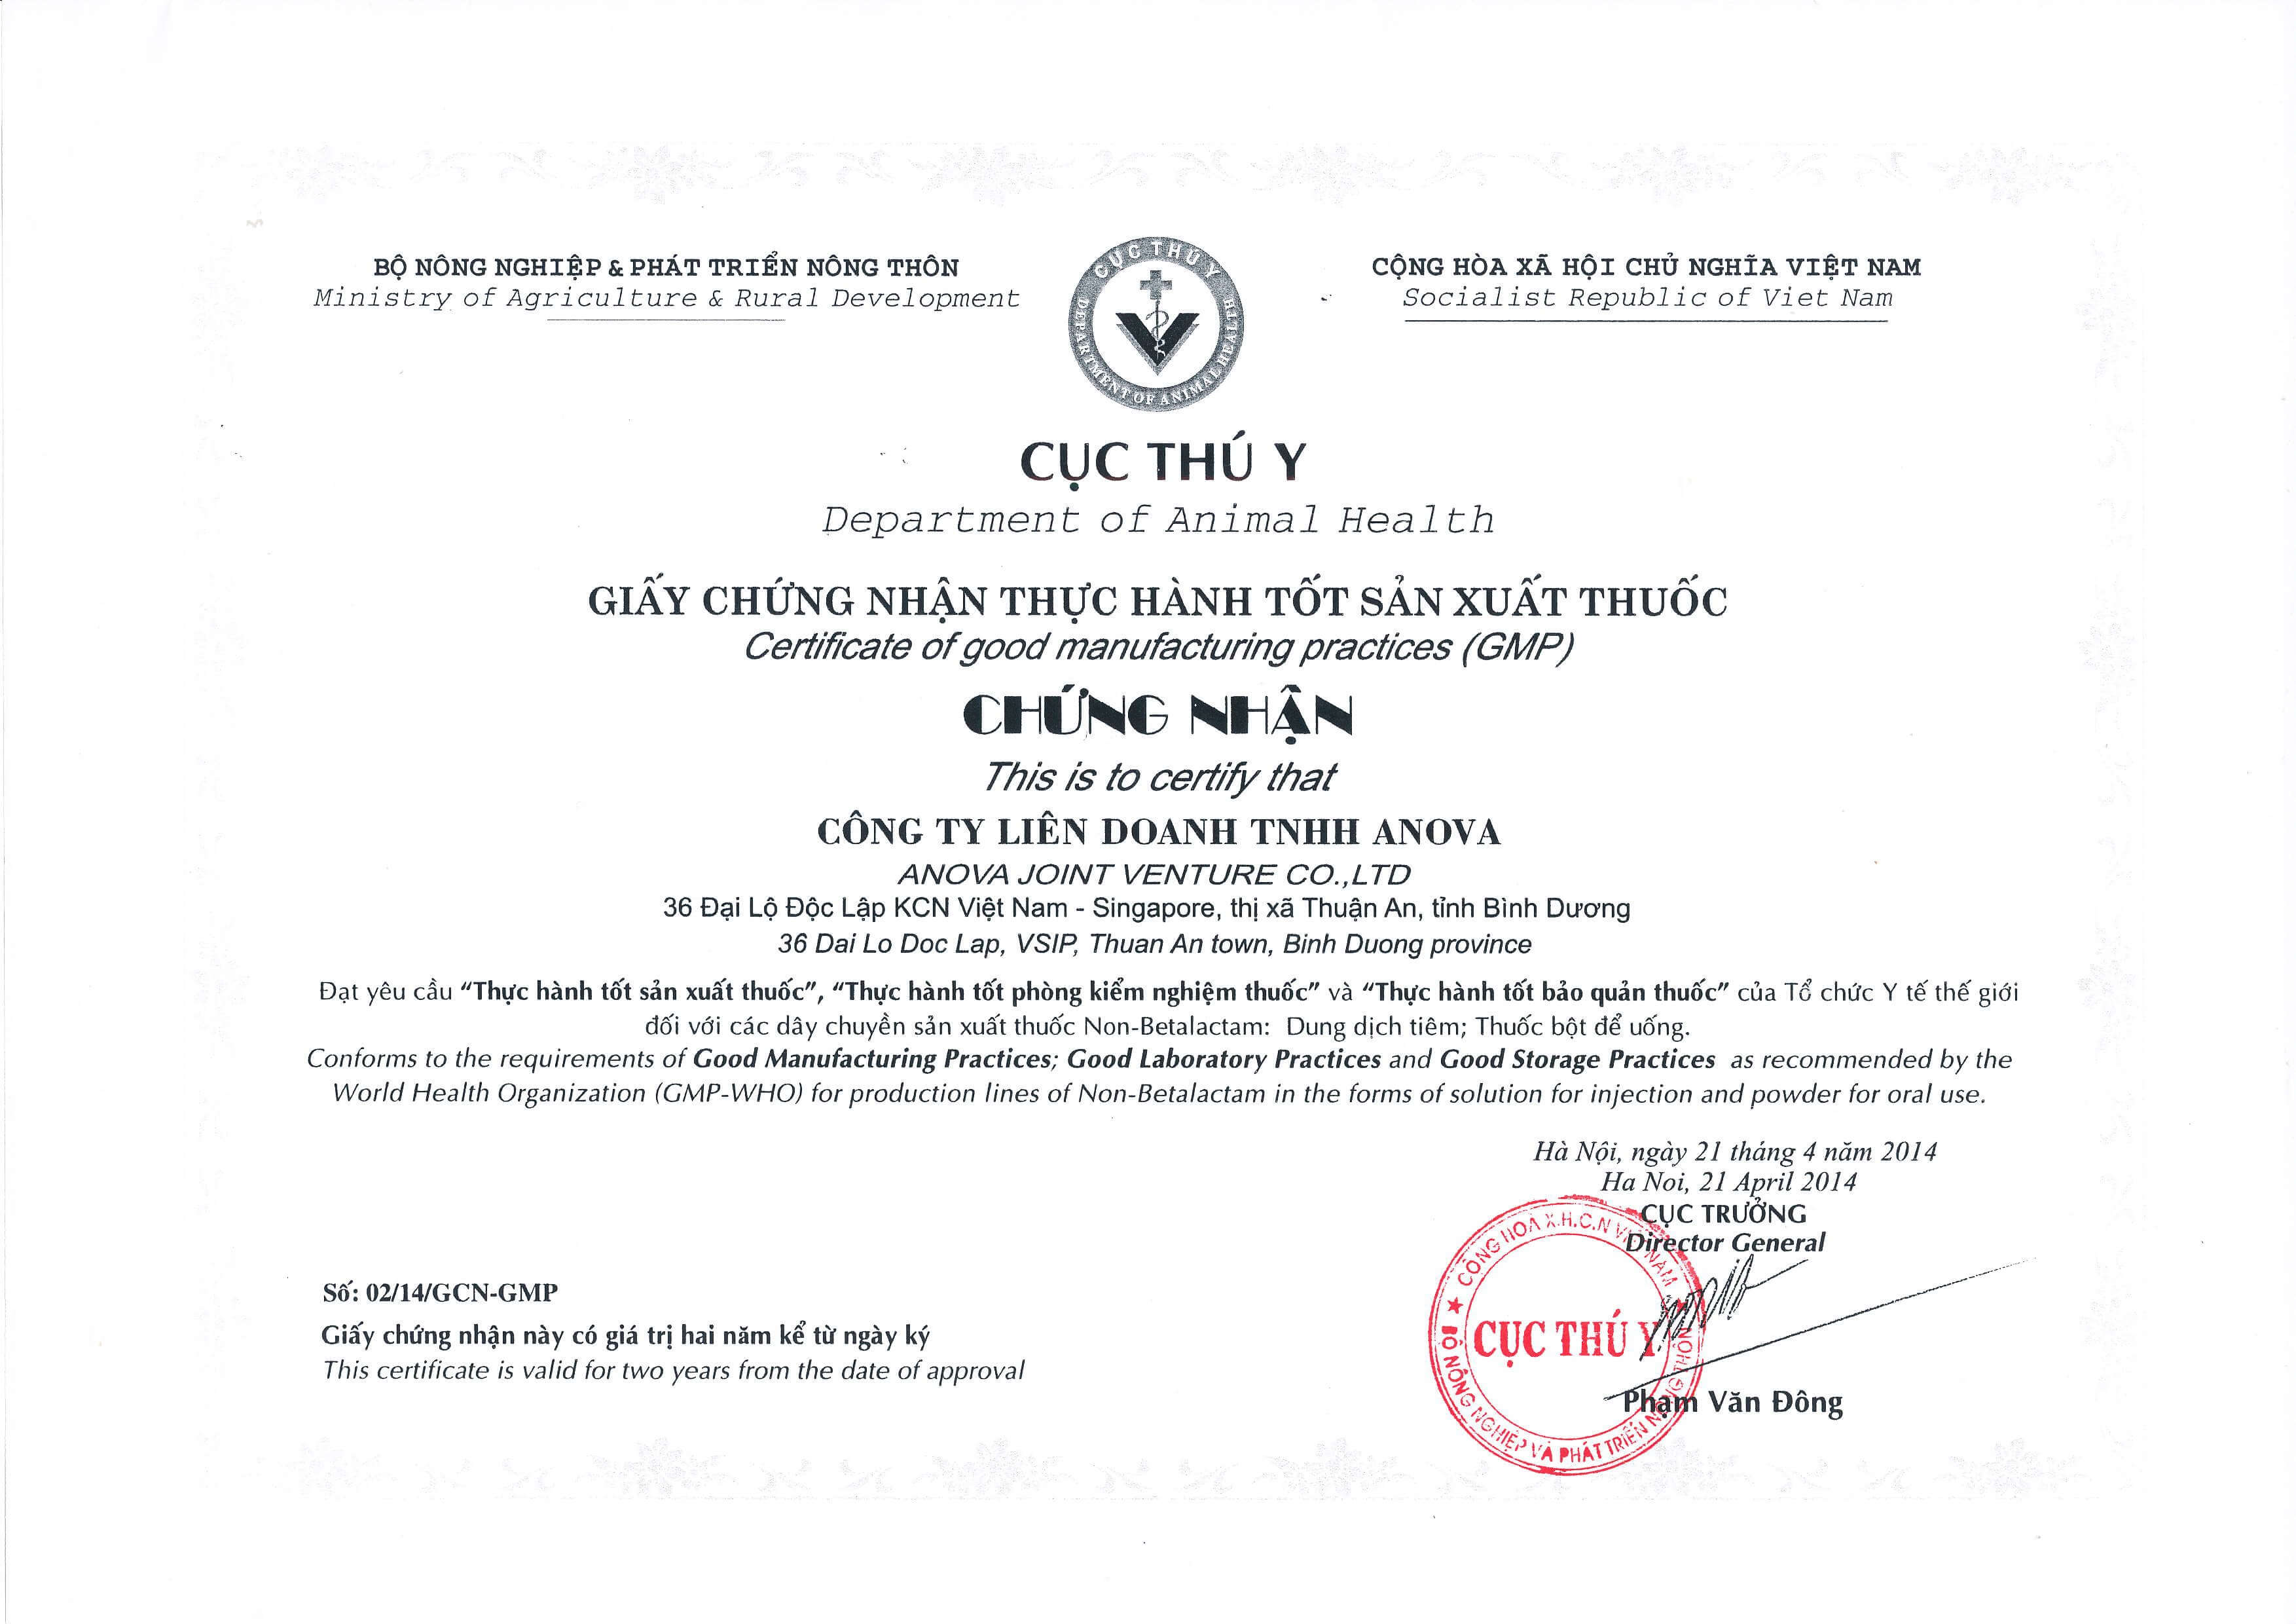 Department of Animal Health: Issued Certificate of "Good Manufacturing Practice - GMP", "Good Laboratory Practices - GLP", "Good Storage Practice - GSP" by the World Health Organization WHO.